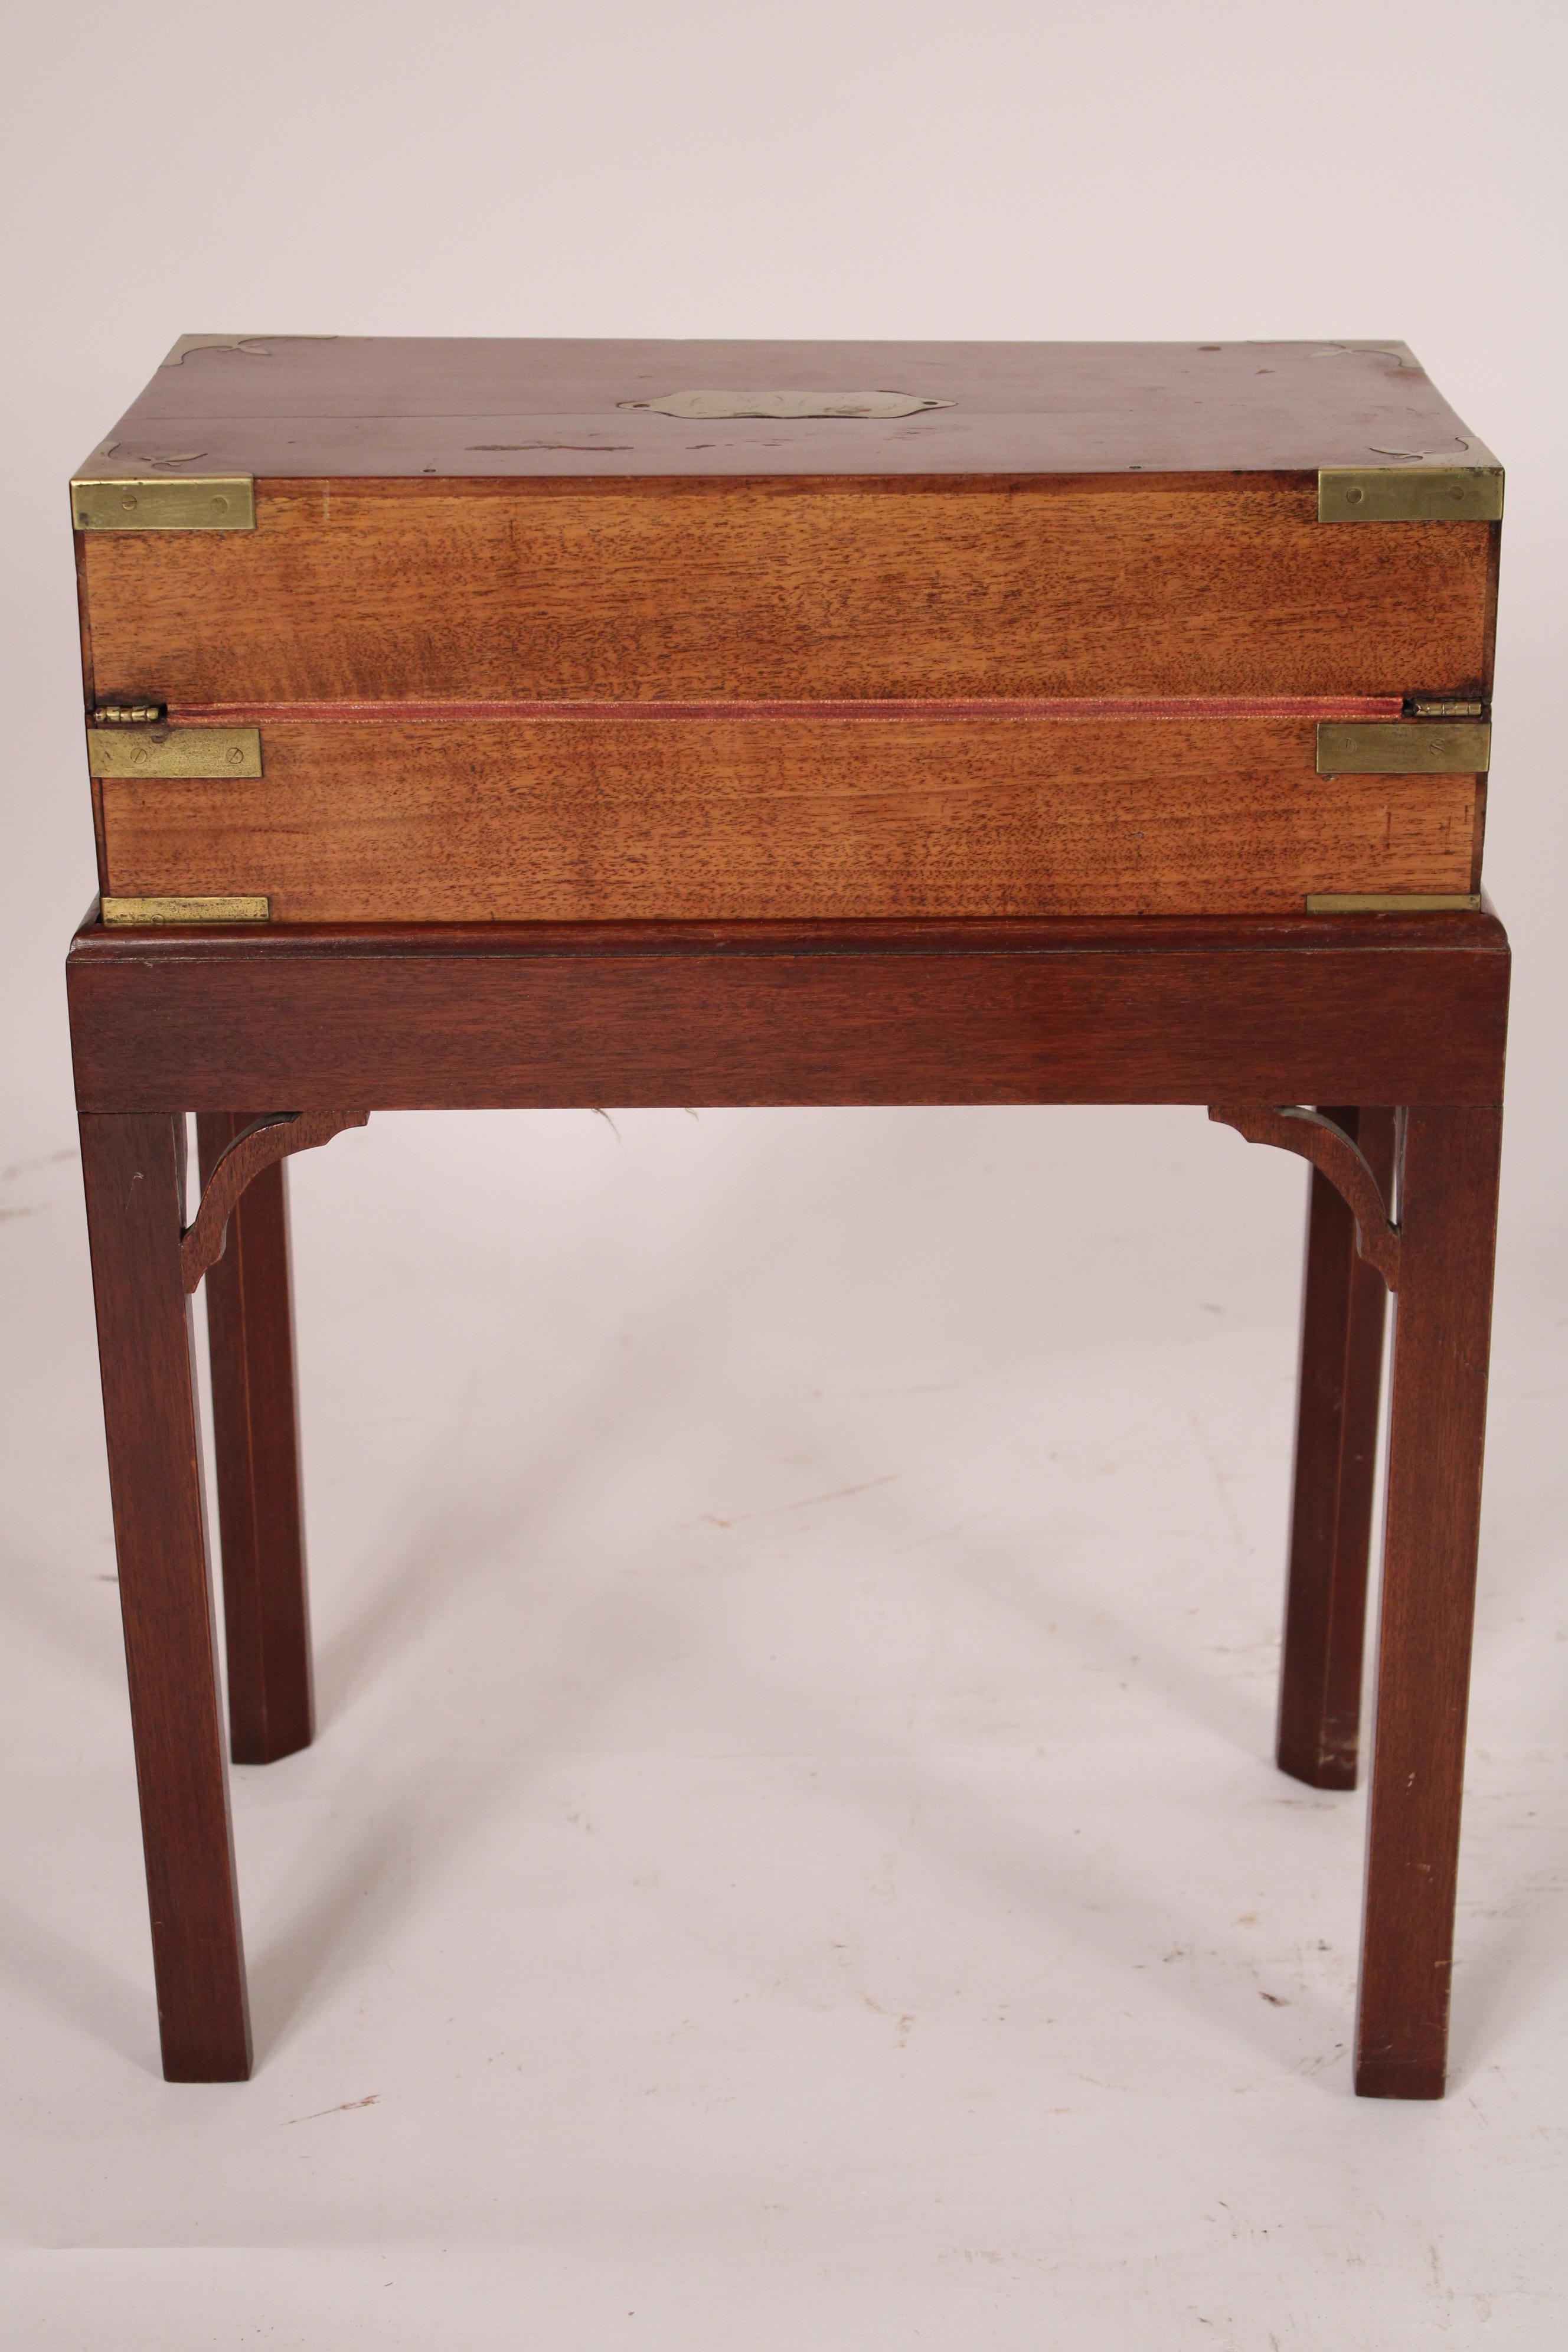 19th Century Camphor Wood Campaign Style Writing Box on Stand